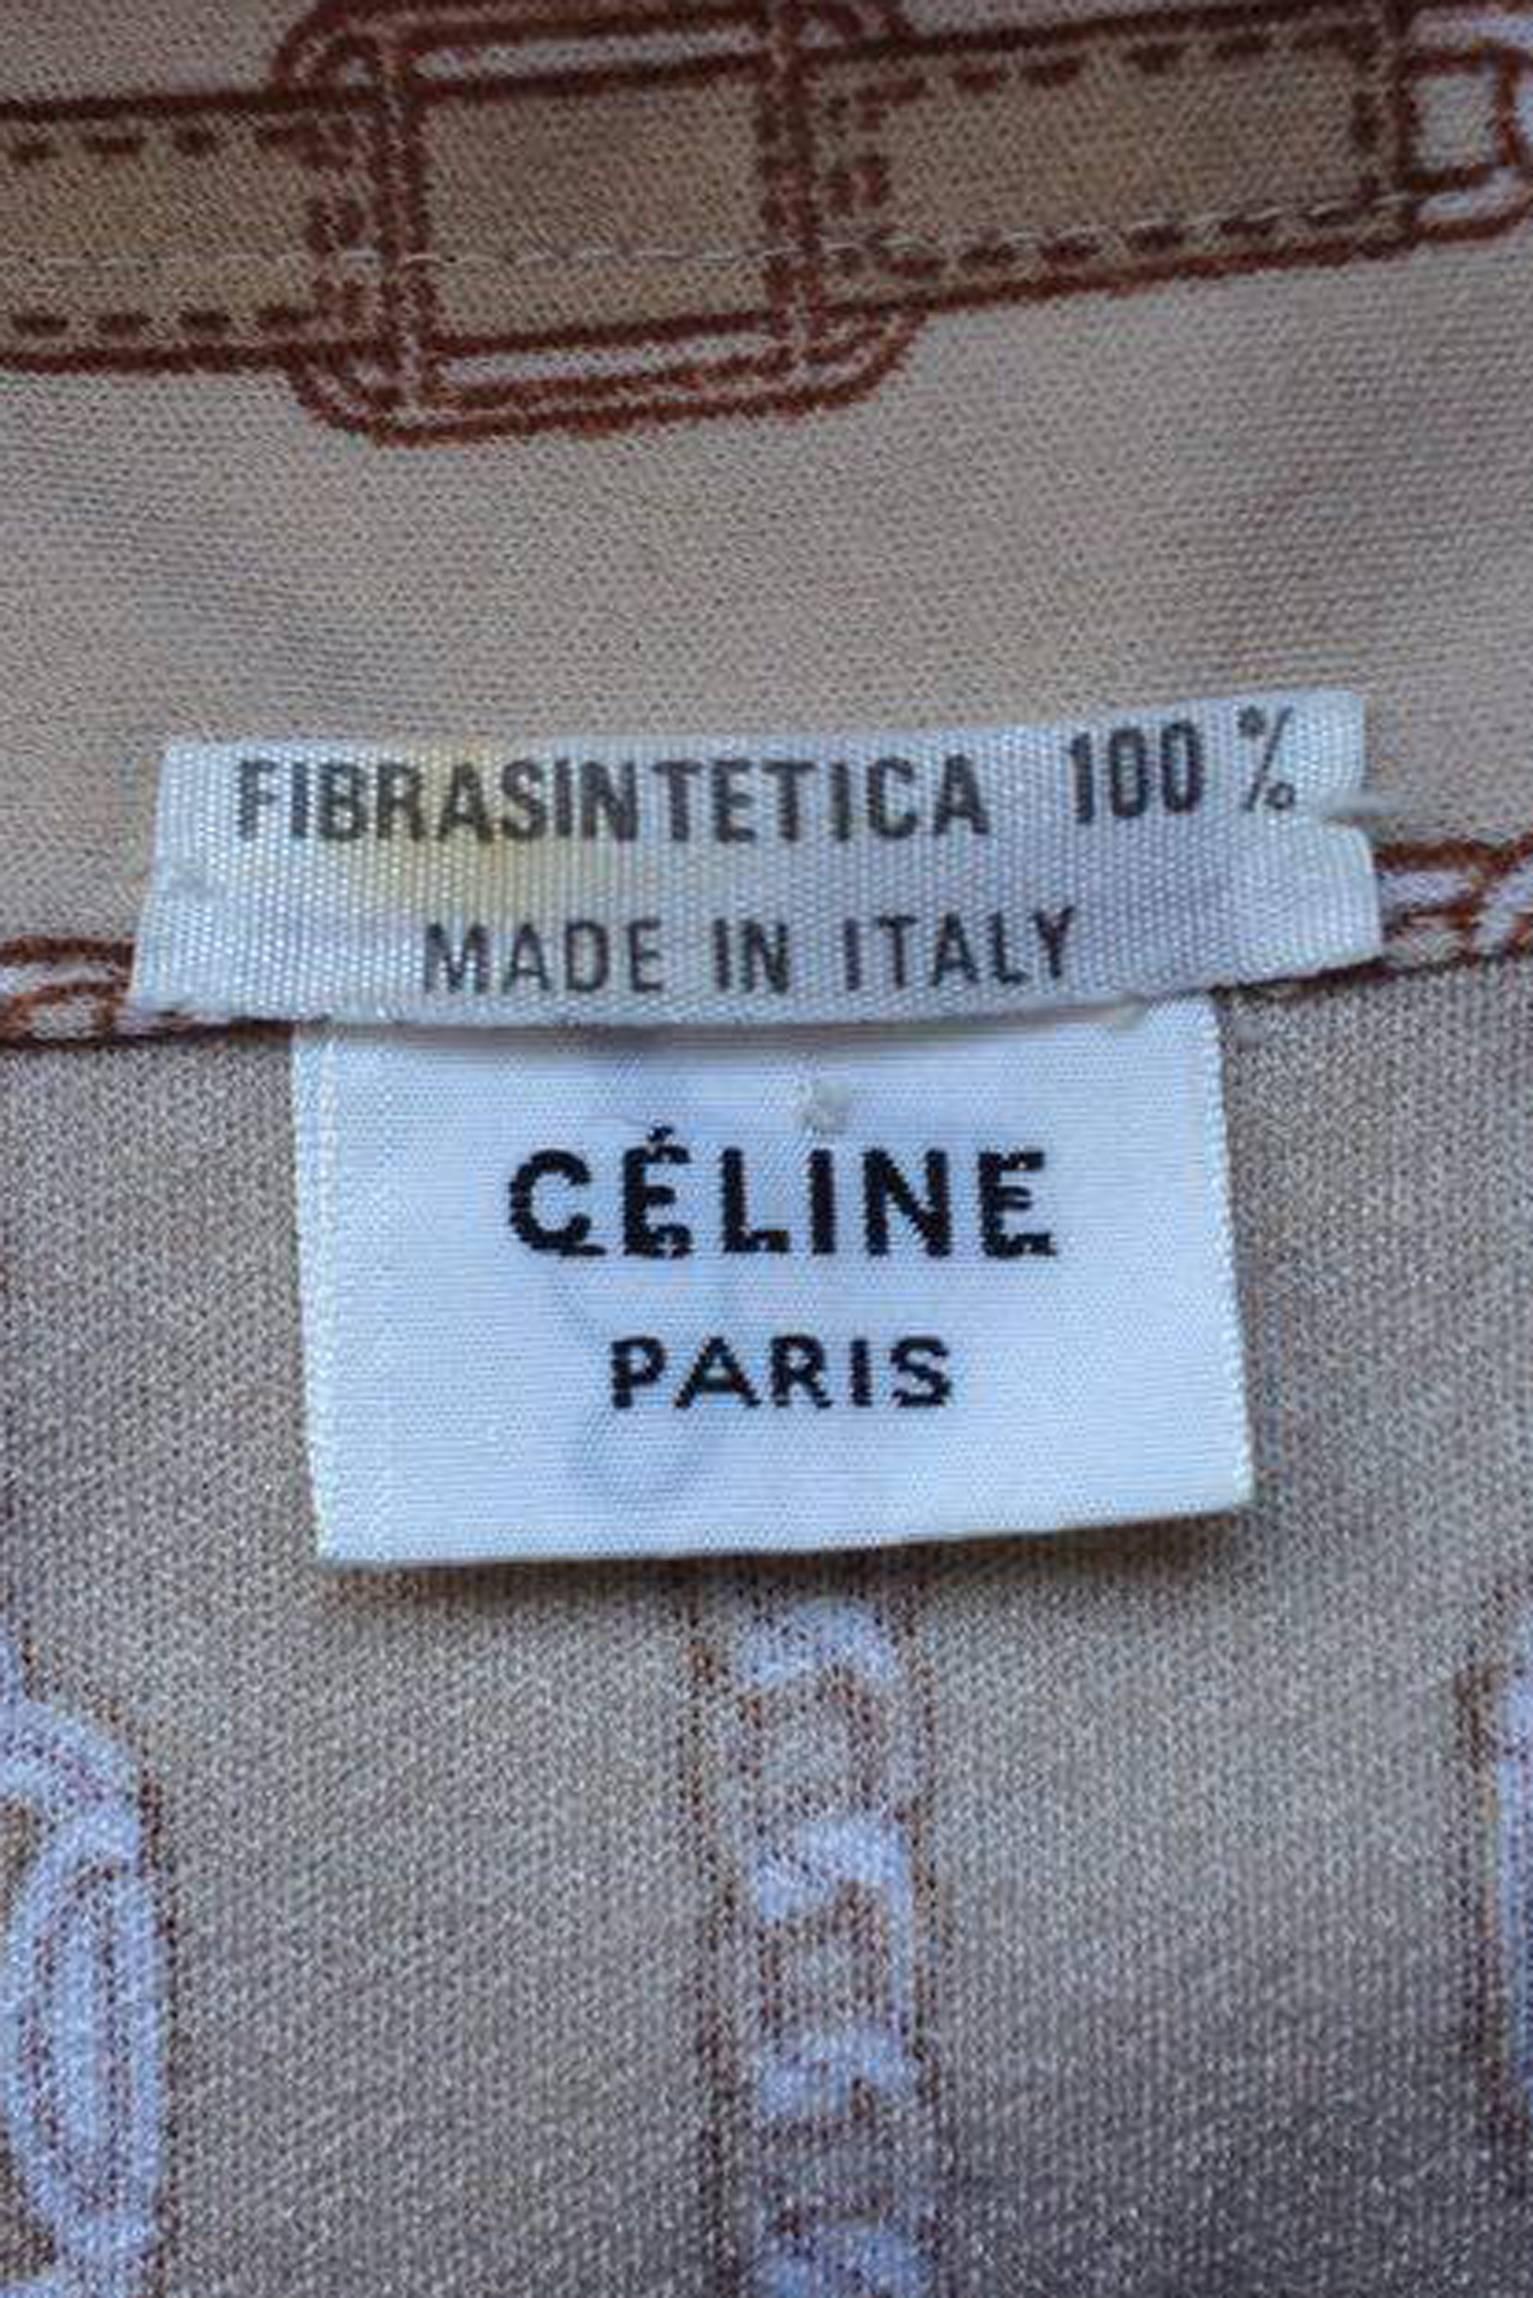 A 1970s beige Celine blouse with long tapered sleeves with two buttoned cuffs and a front buttoned closure. The gorgeous blouse features the iconic chain print with ‘Celine’ logo inserts which elongates the length by its vertical placement. 

The